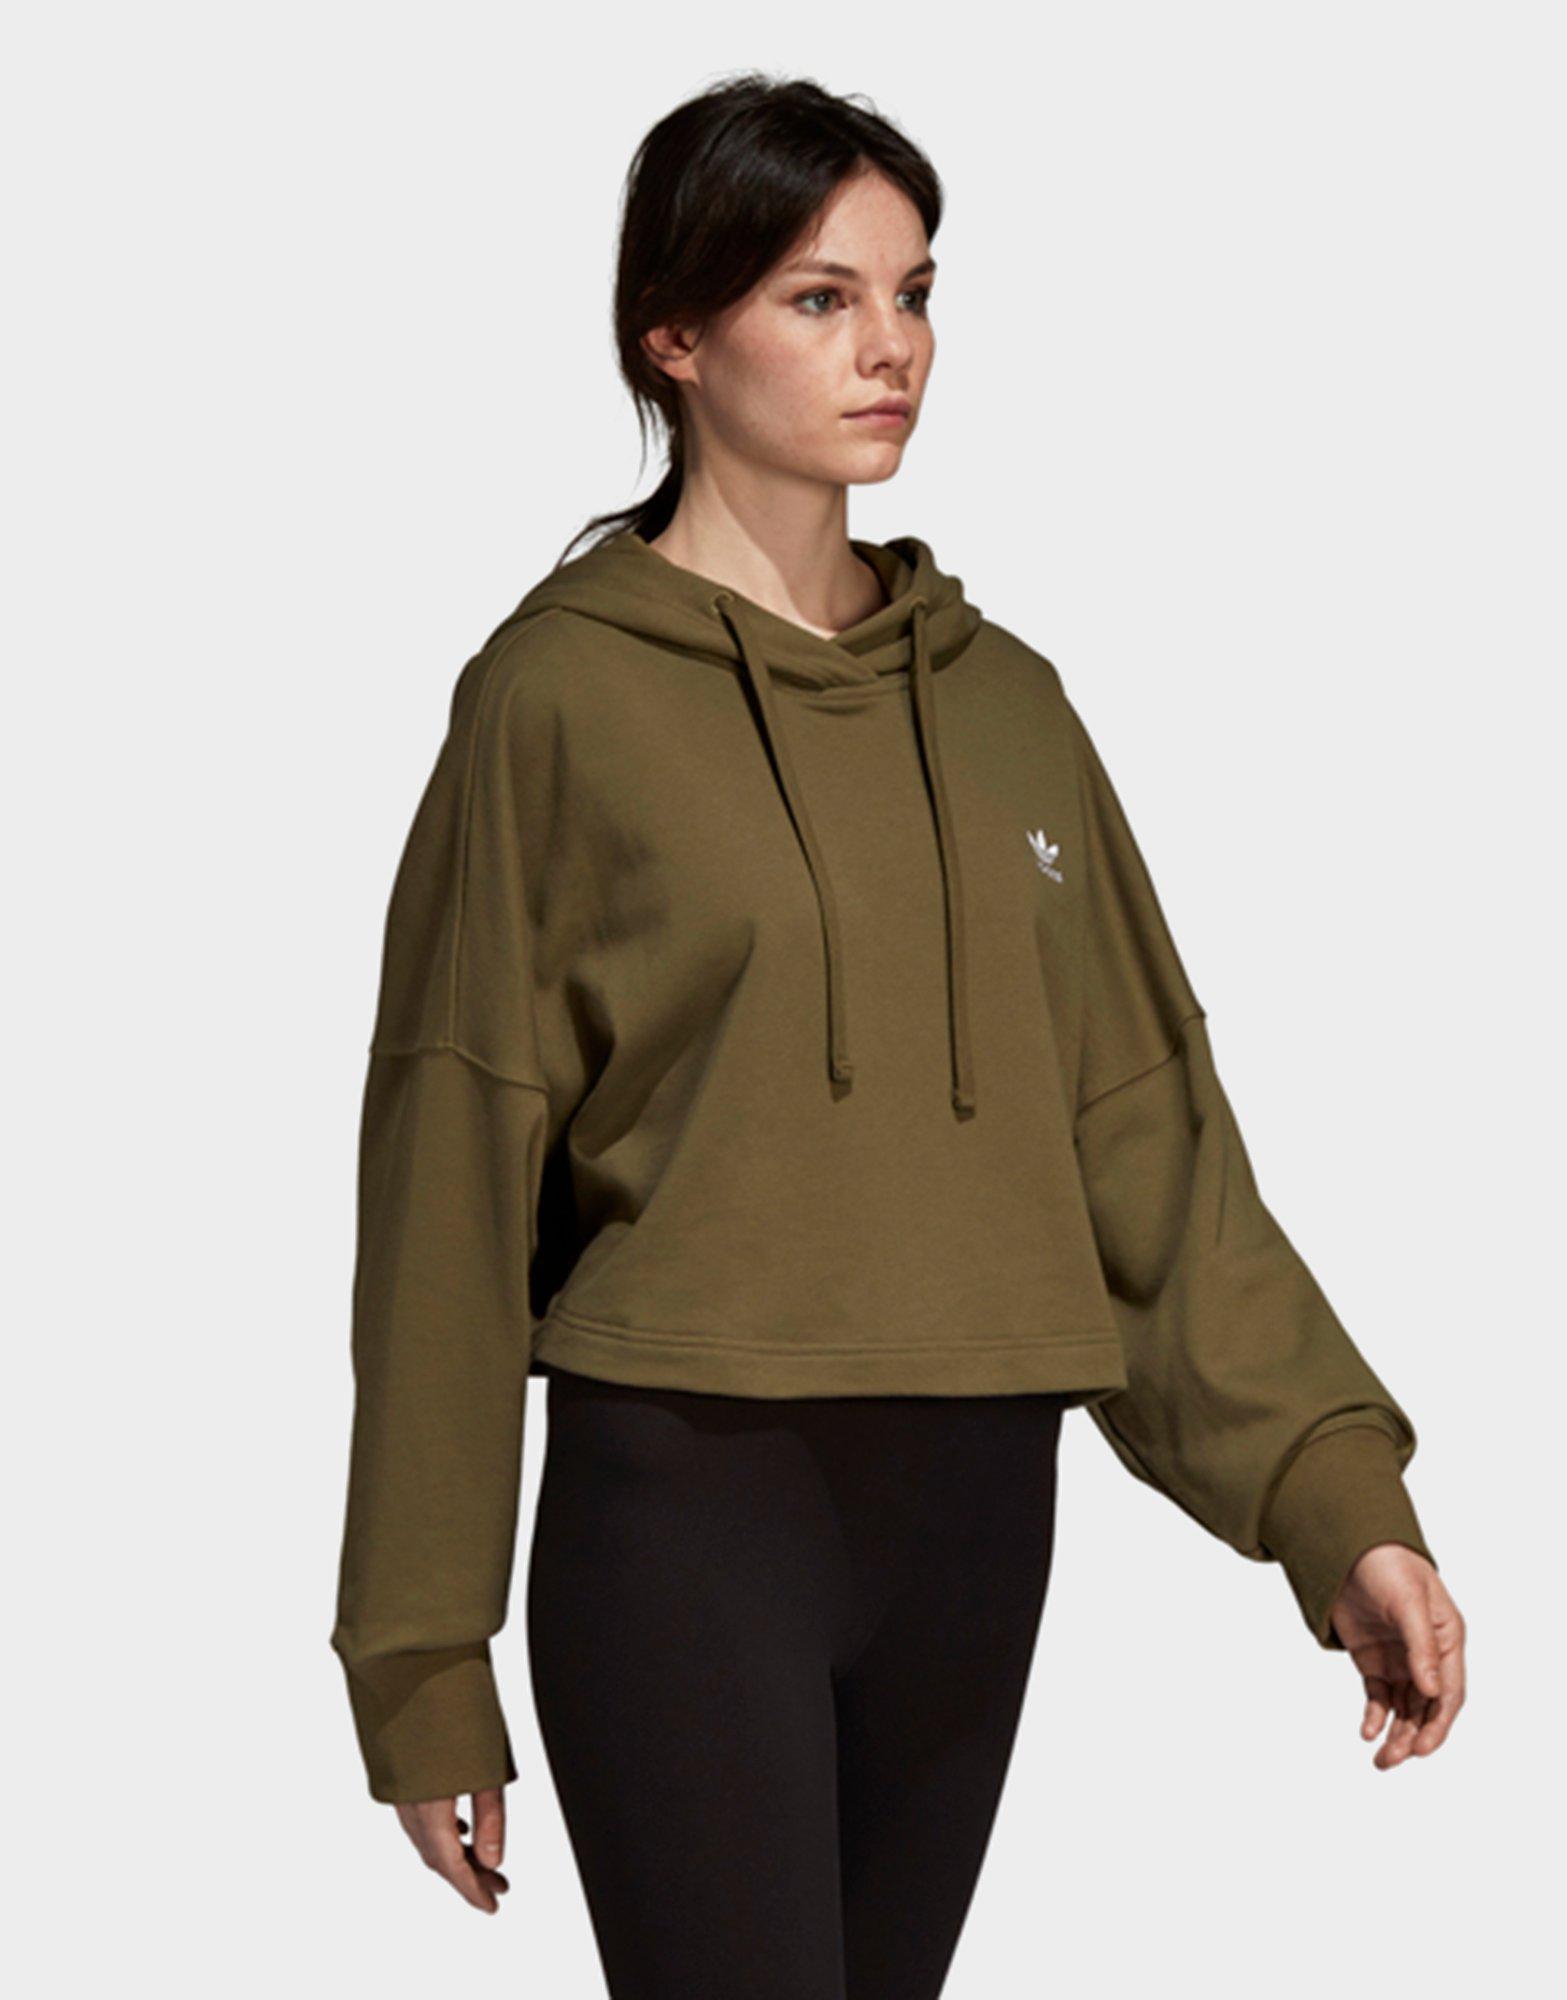 styling complements cropped hoodie